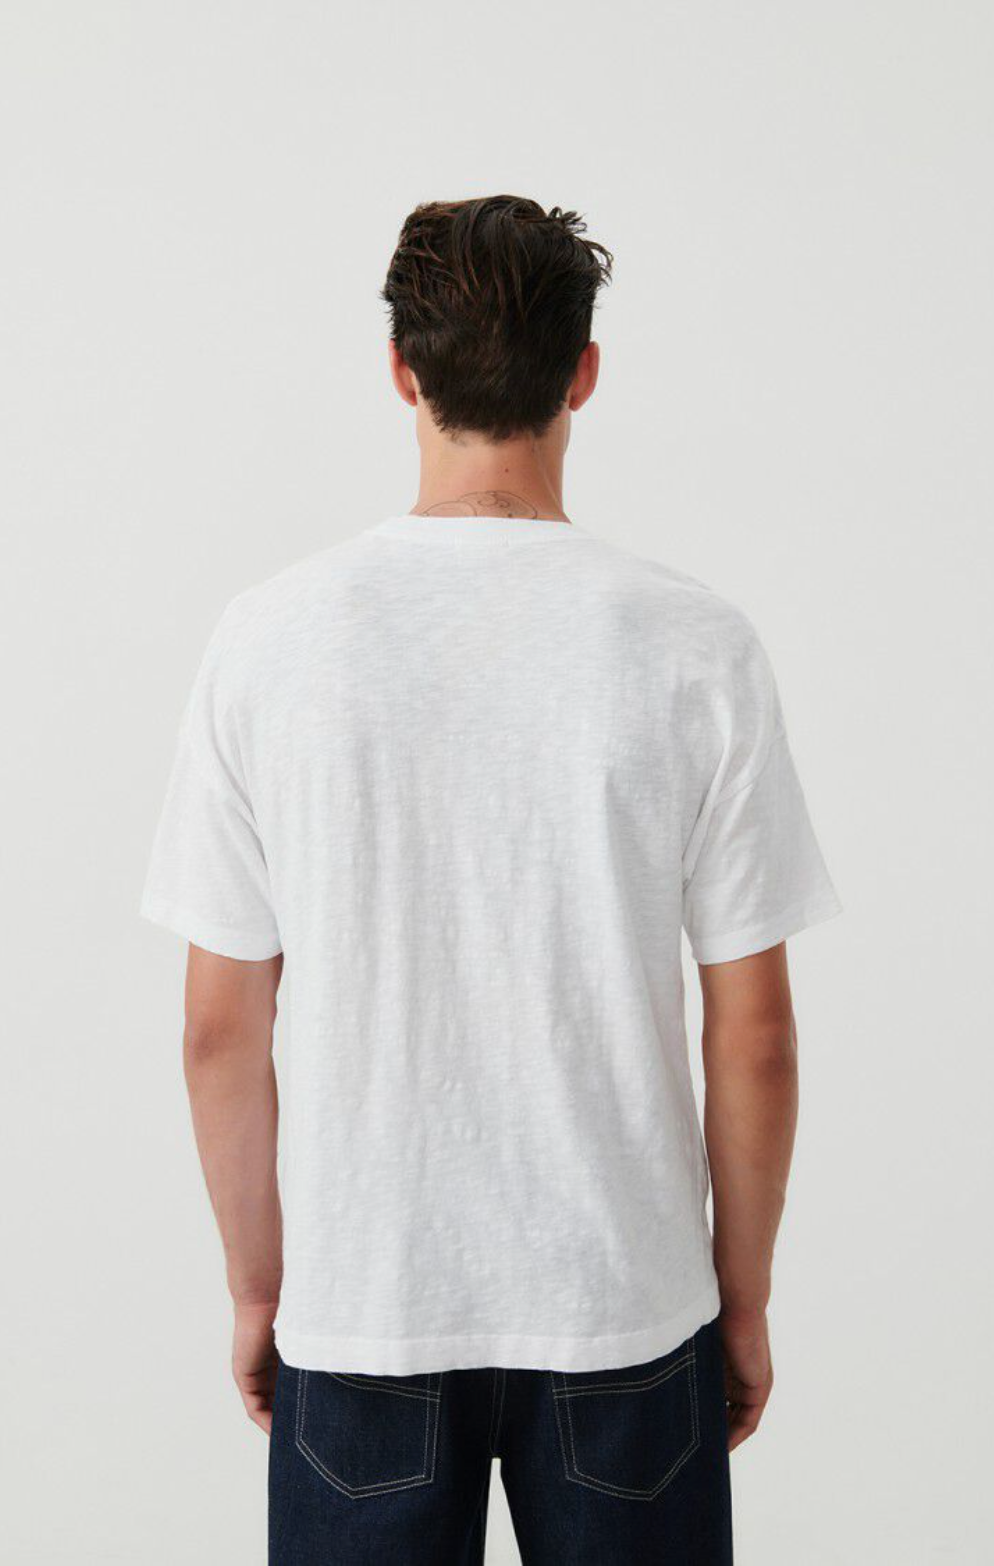 A medium close up backside image of a male model wearing the Bysapick T-Shirt in white styled with dark denim